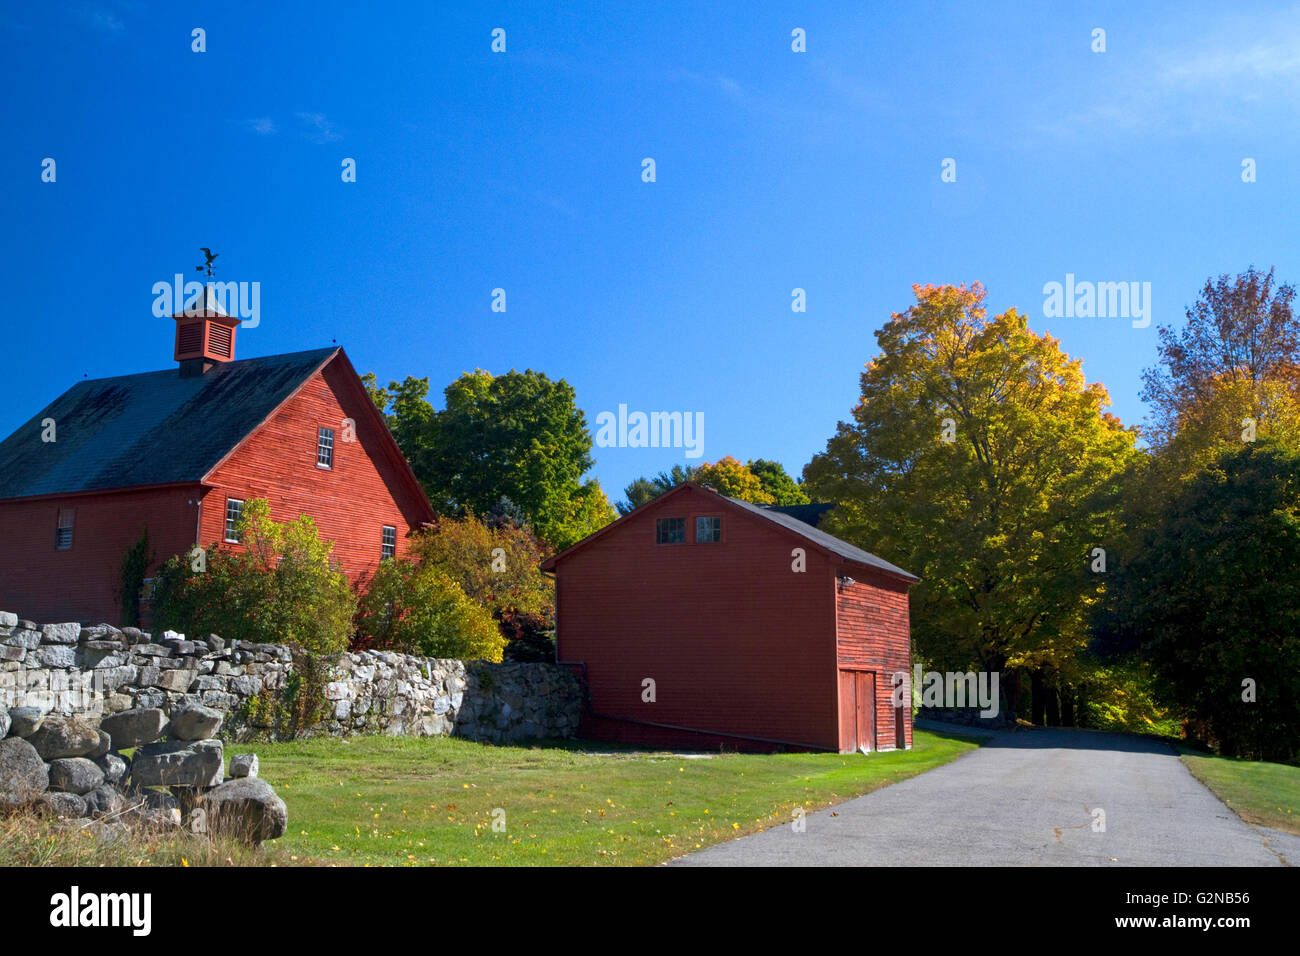 Red barn in the coutryside near Keene, New Hampshire, USA. Stock Photo